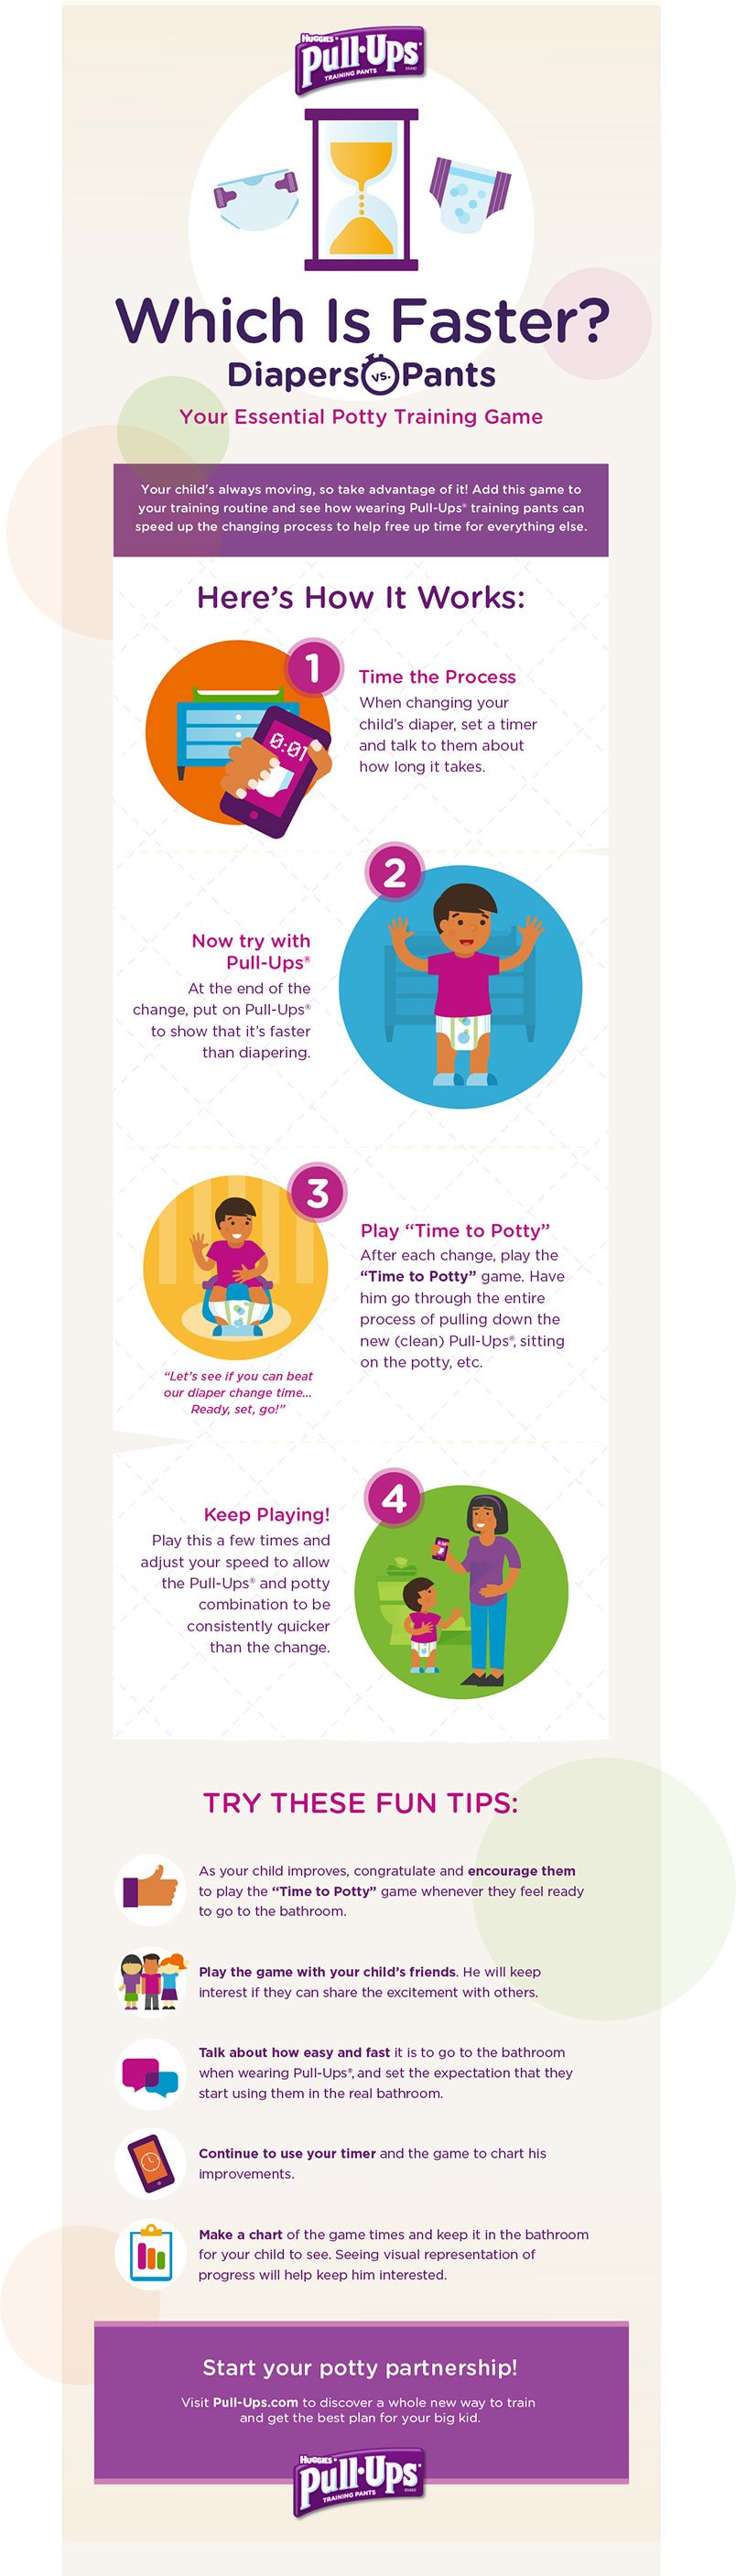 Infographic showing the step-by-step instructions for the Which is Faster Diapers Vs Pants game